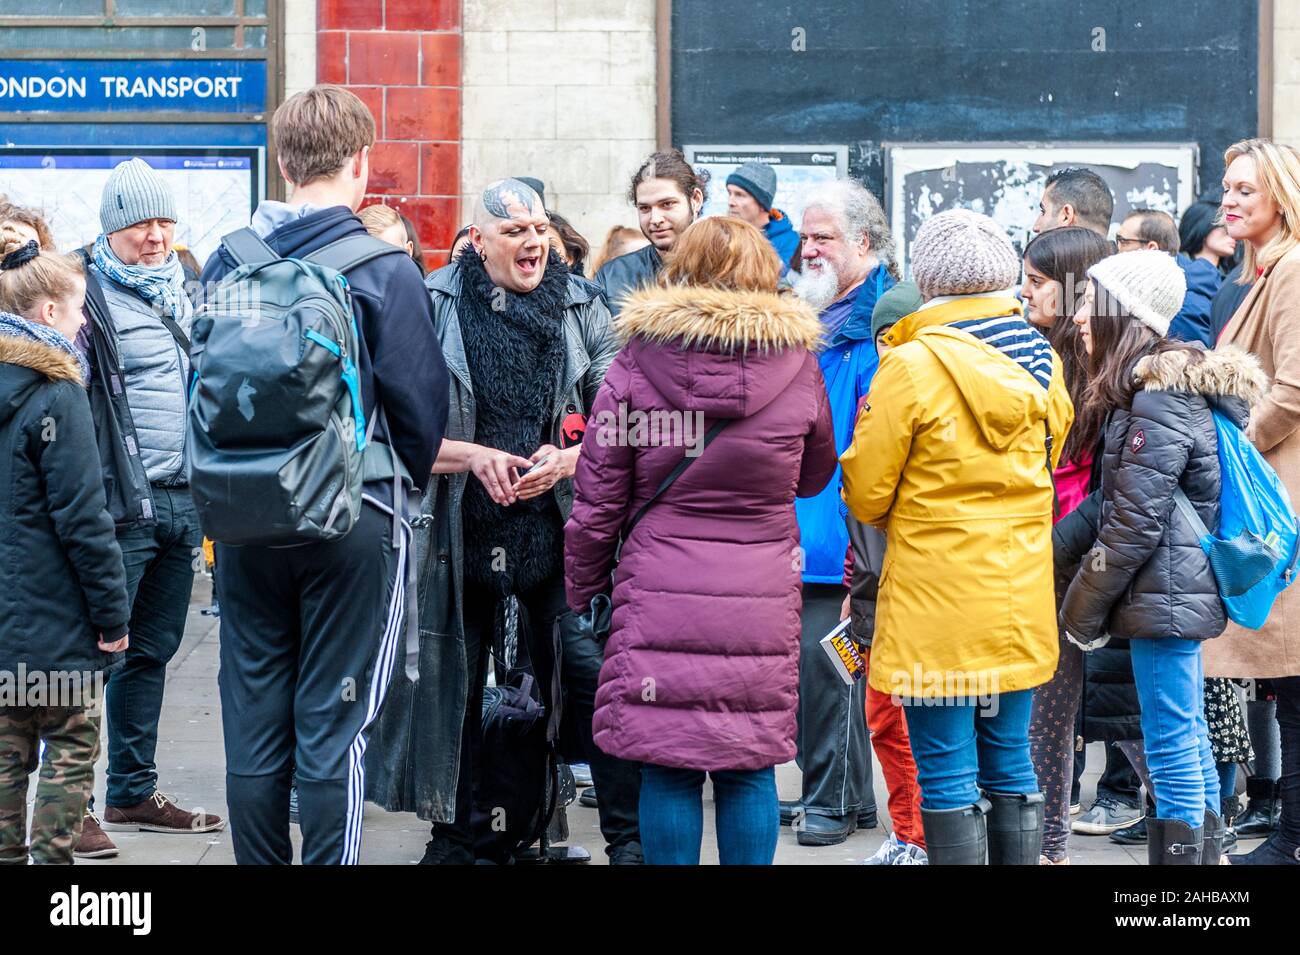 Man with tattoo on head speaks to tourists in Camden Town, London, UK. Stock Photo